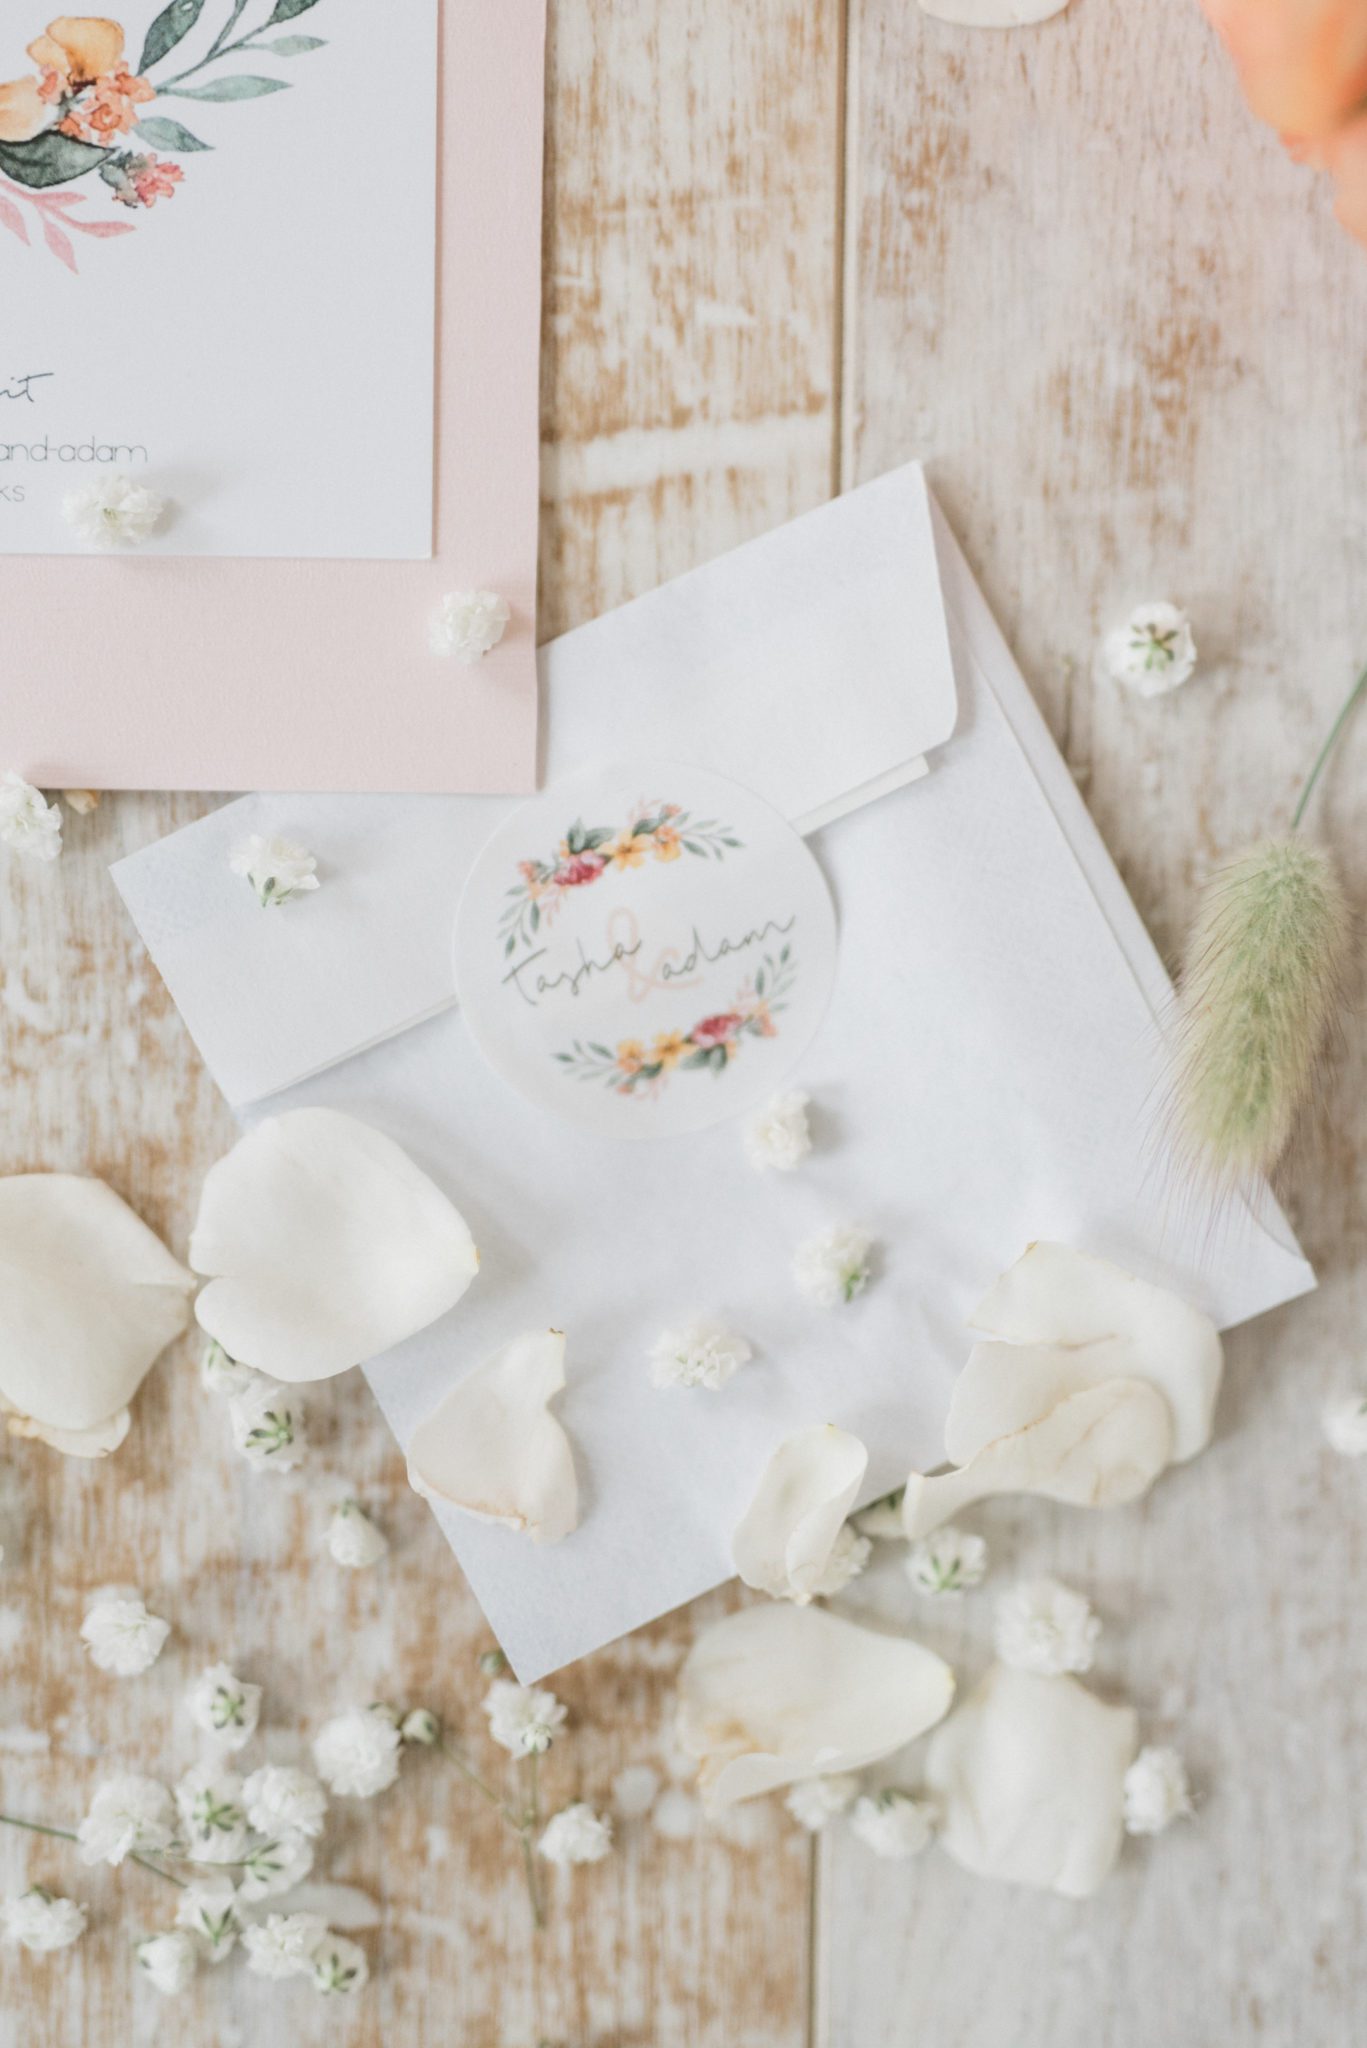 Romantic wedding stationery with wedding day details